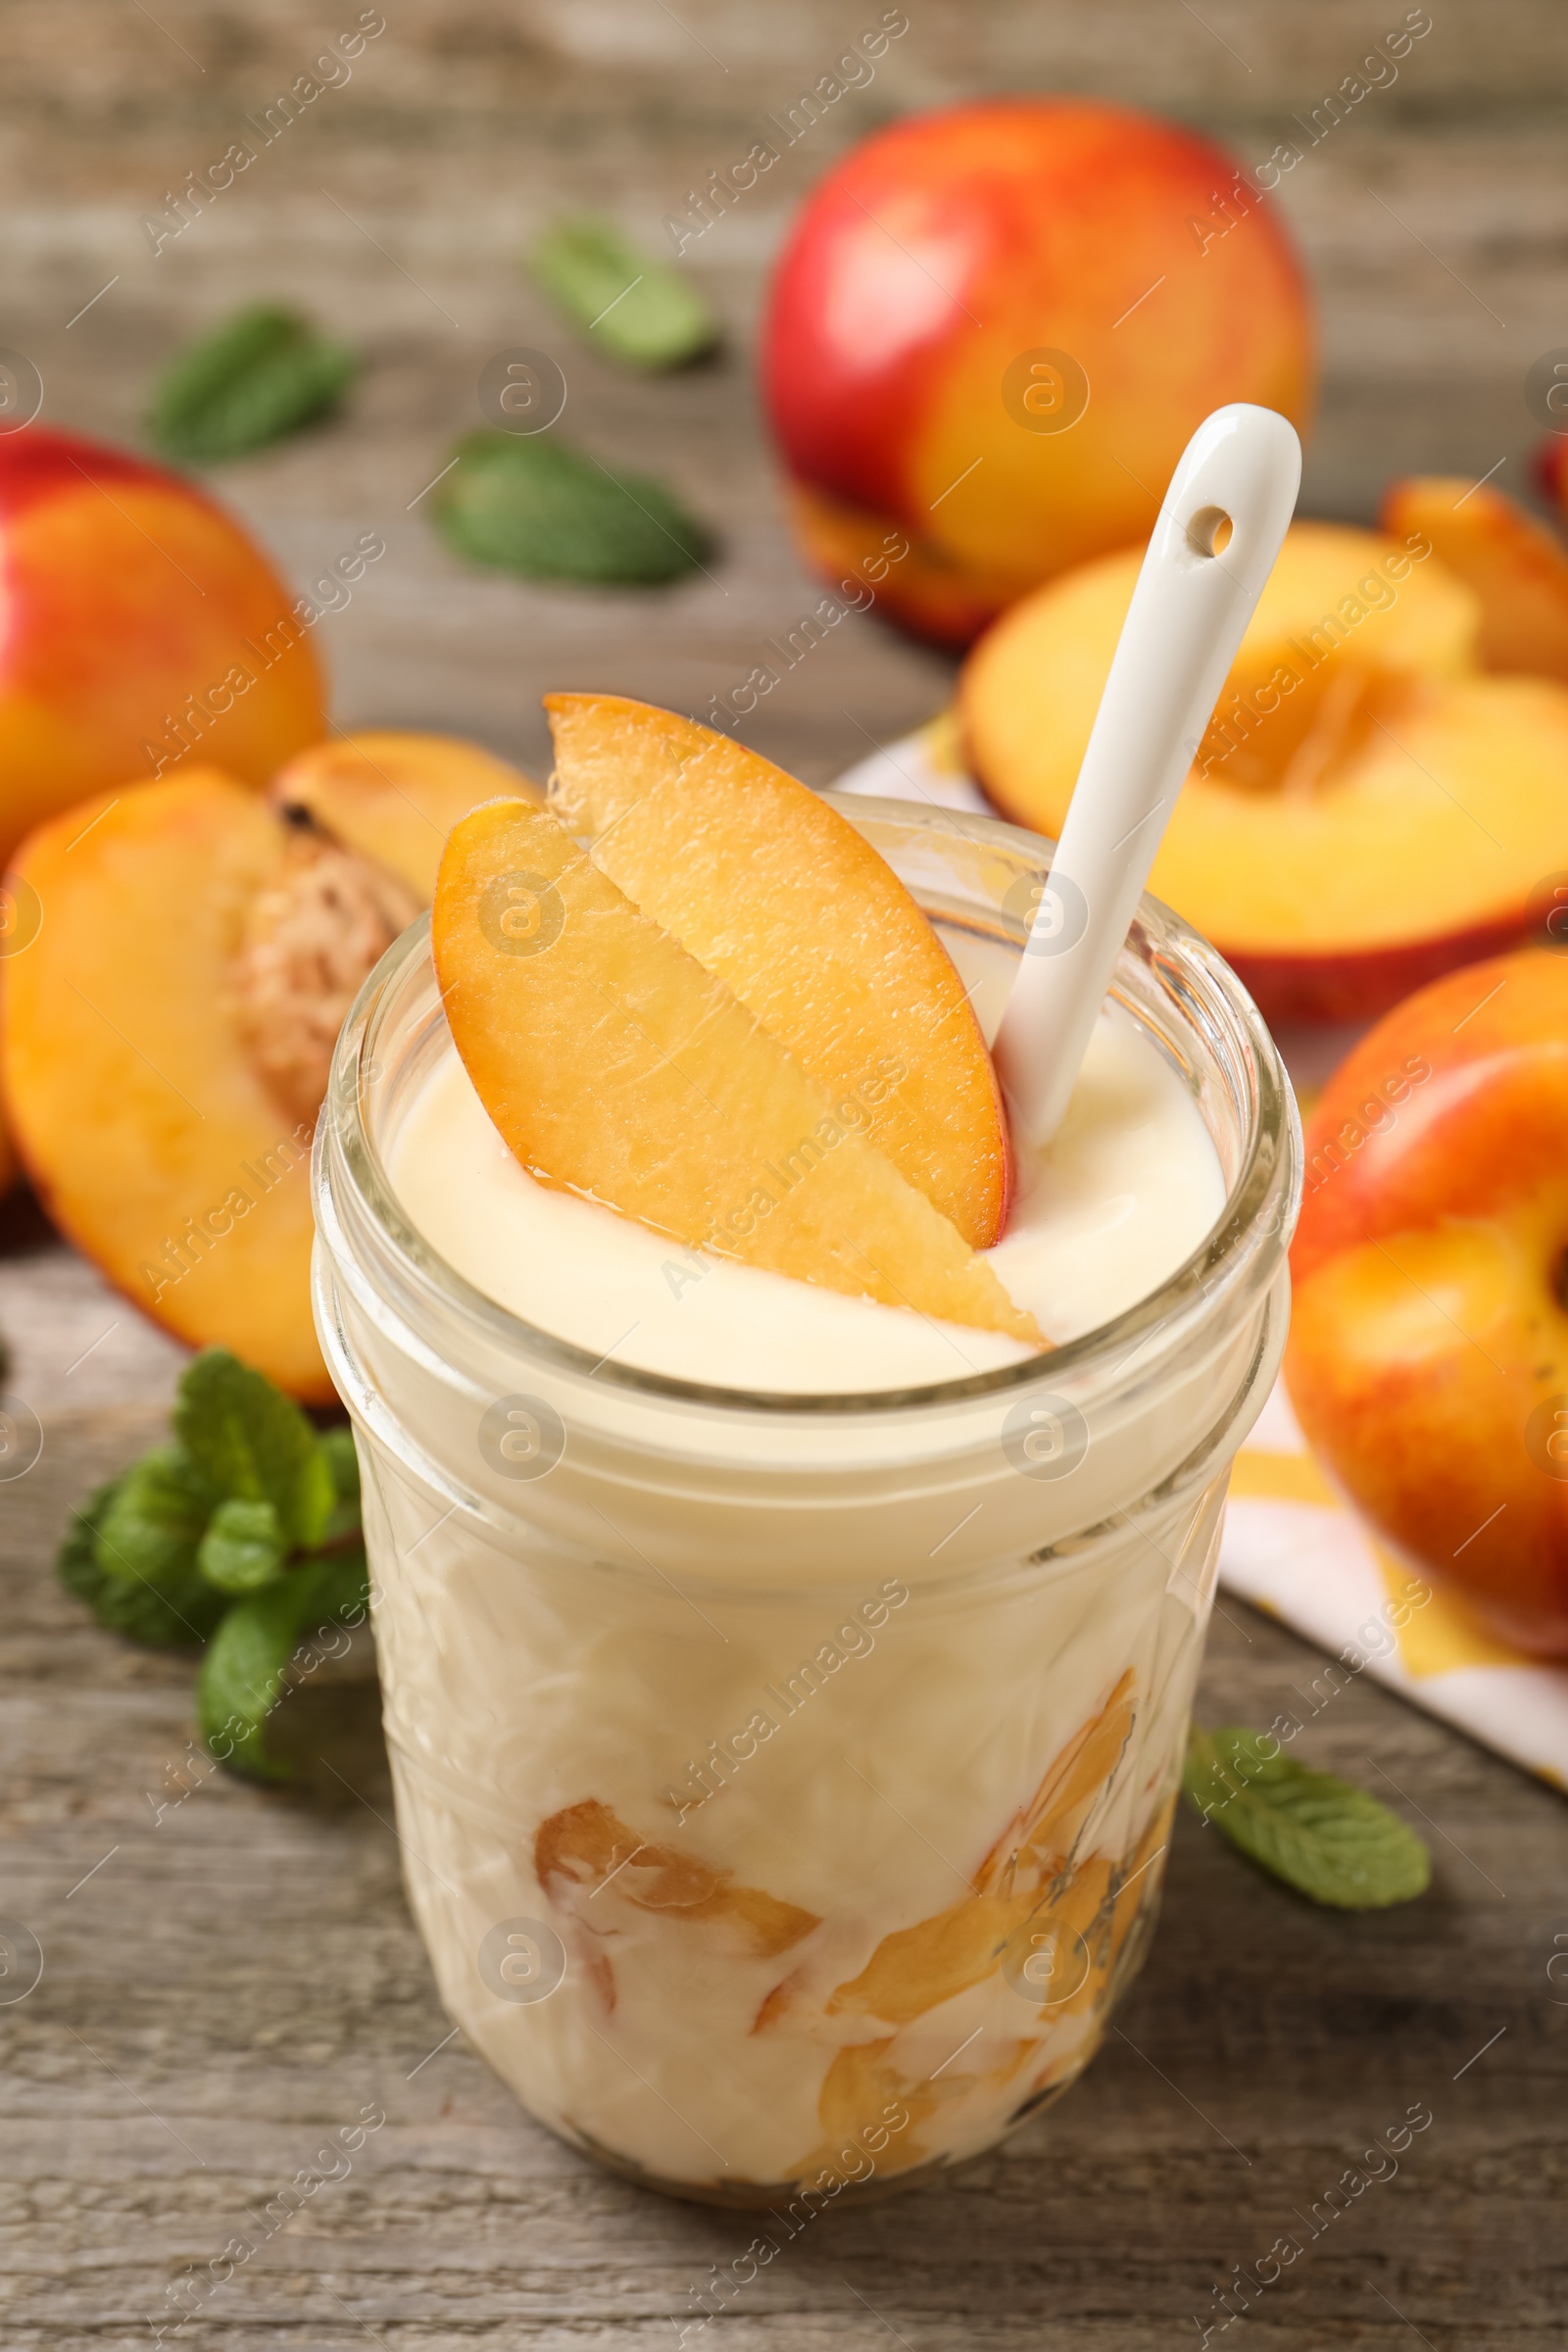 Photo of Tasty peach yogurt with pieces of fruit and spoon in glass jar on wooden table